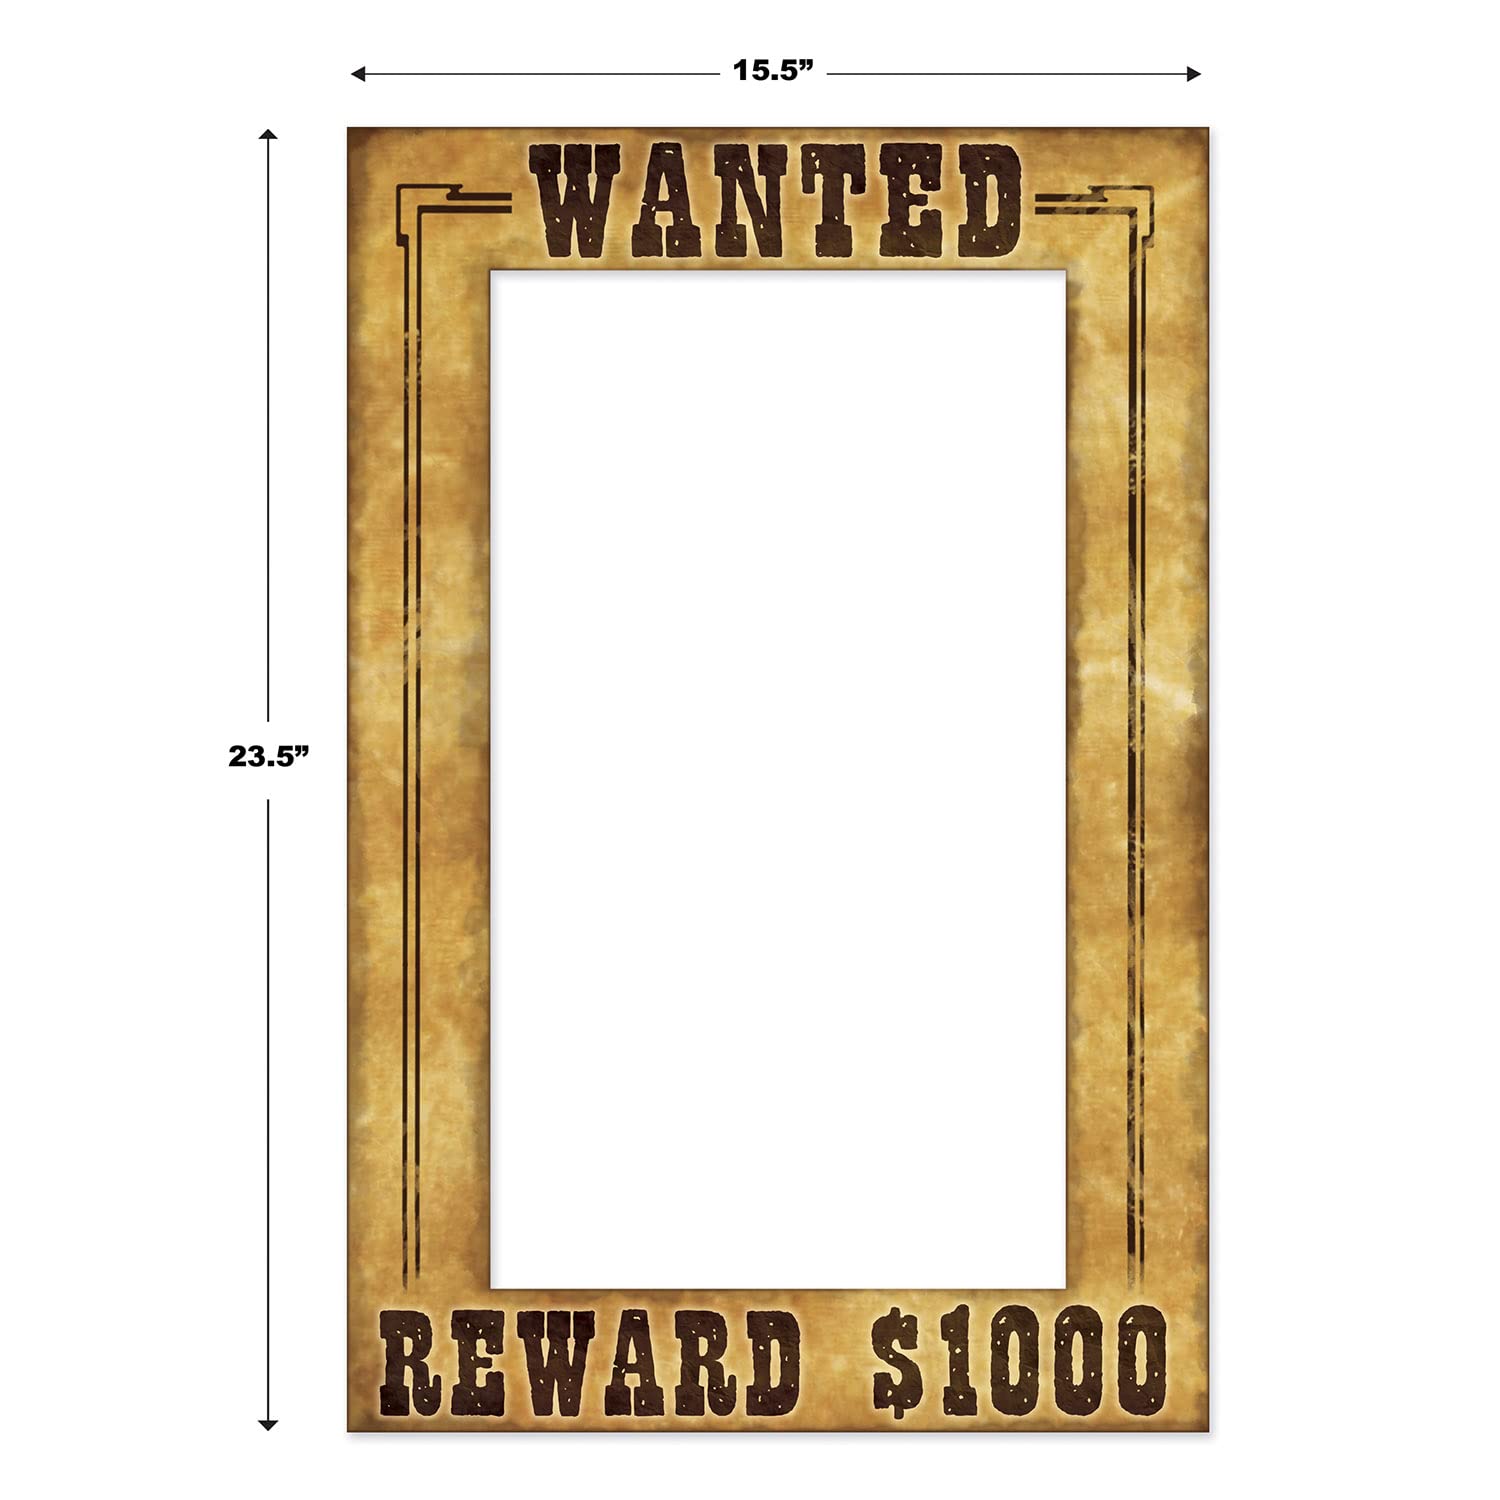 Beistle 2 Piece Wanted Photo Booth Selfie Frames for Wild West Cowboy Western Party Supplies, 23.5